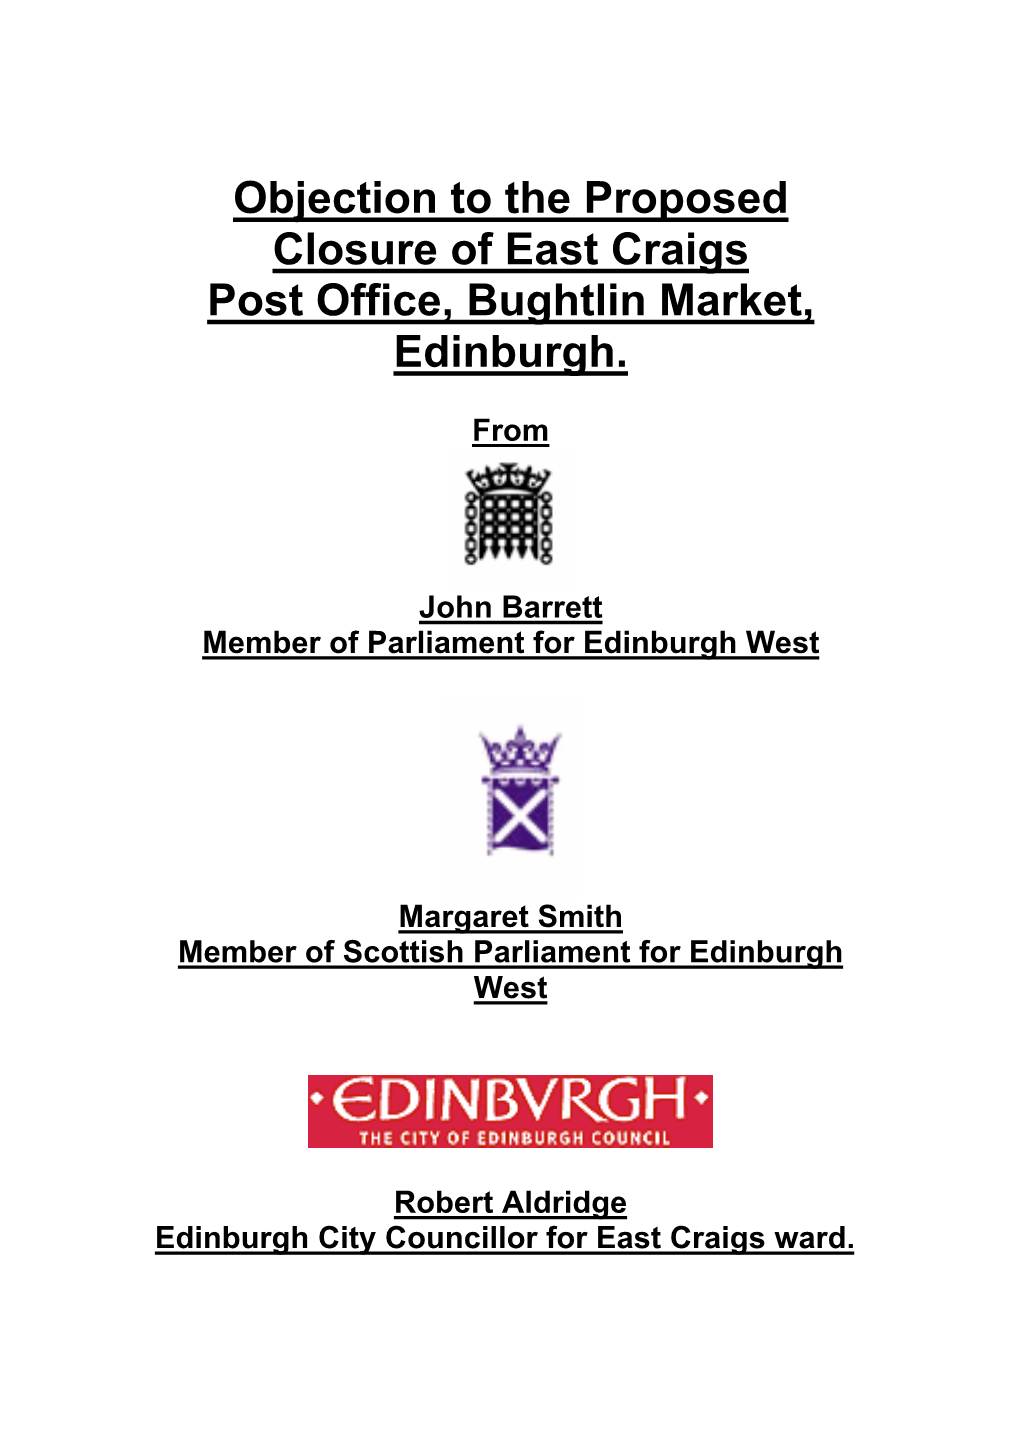 Objection to the Proposed Closure of East Craigs Post Office, Bughtlin Market, Edinburgh